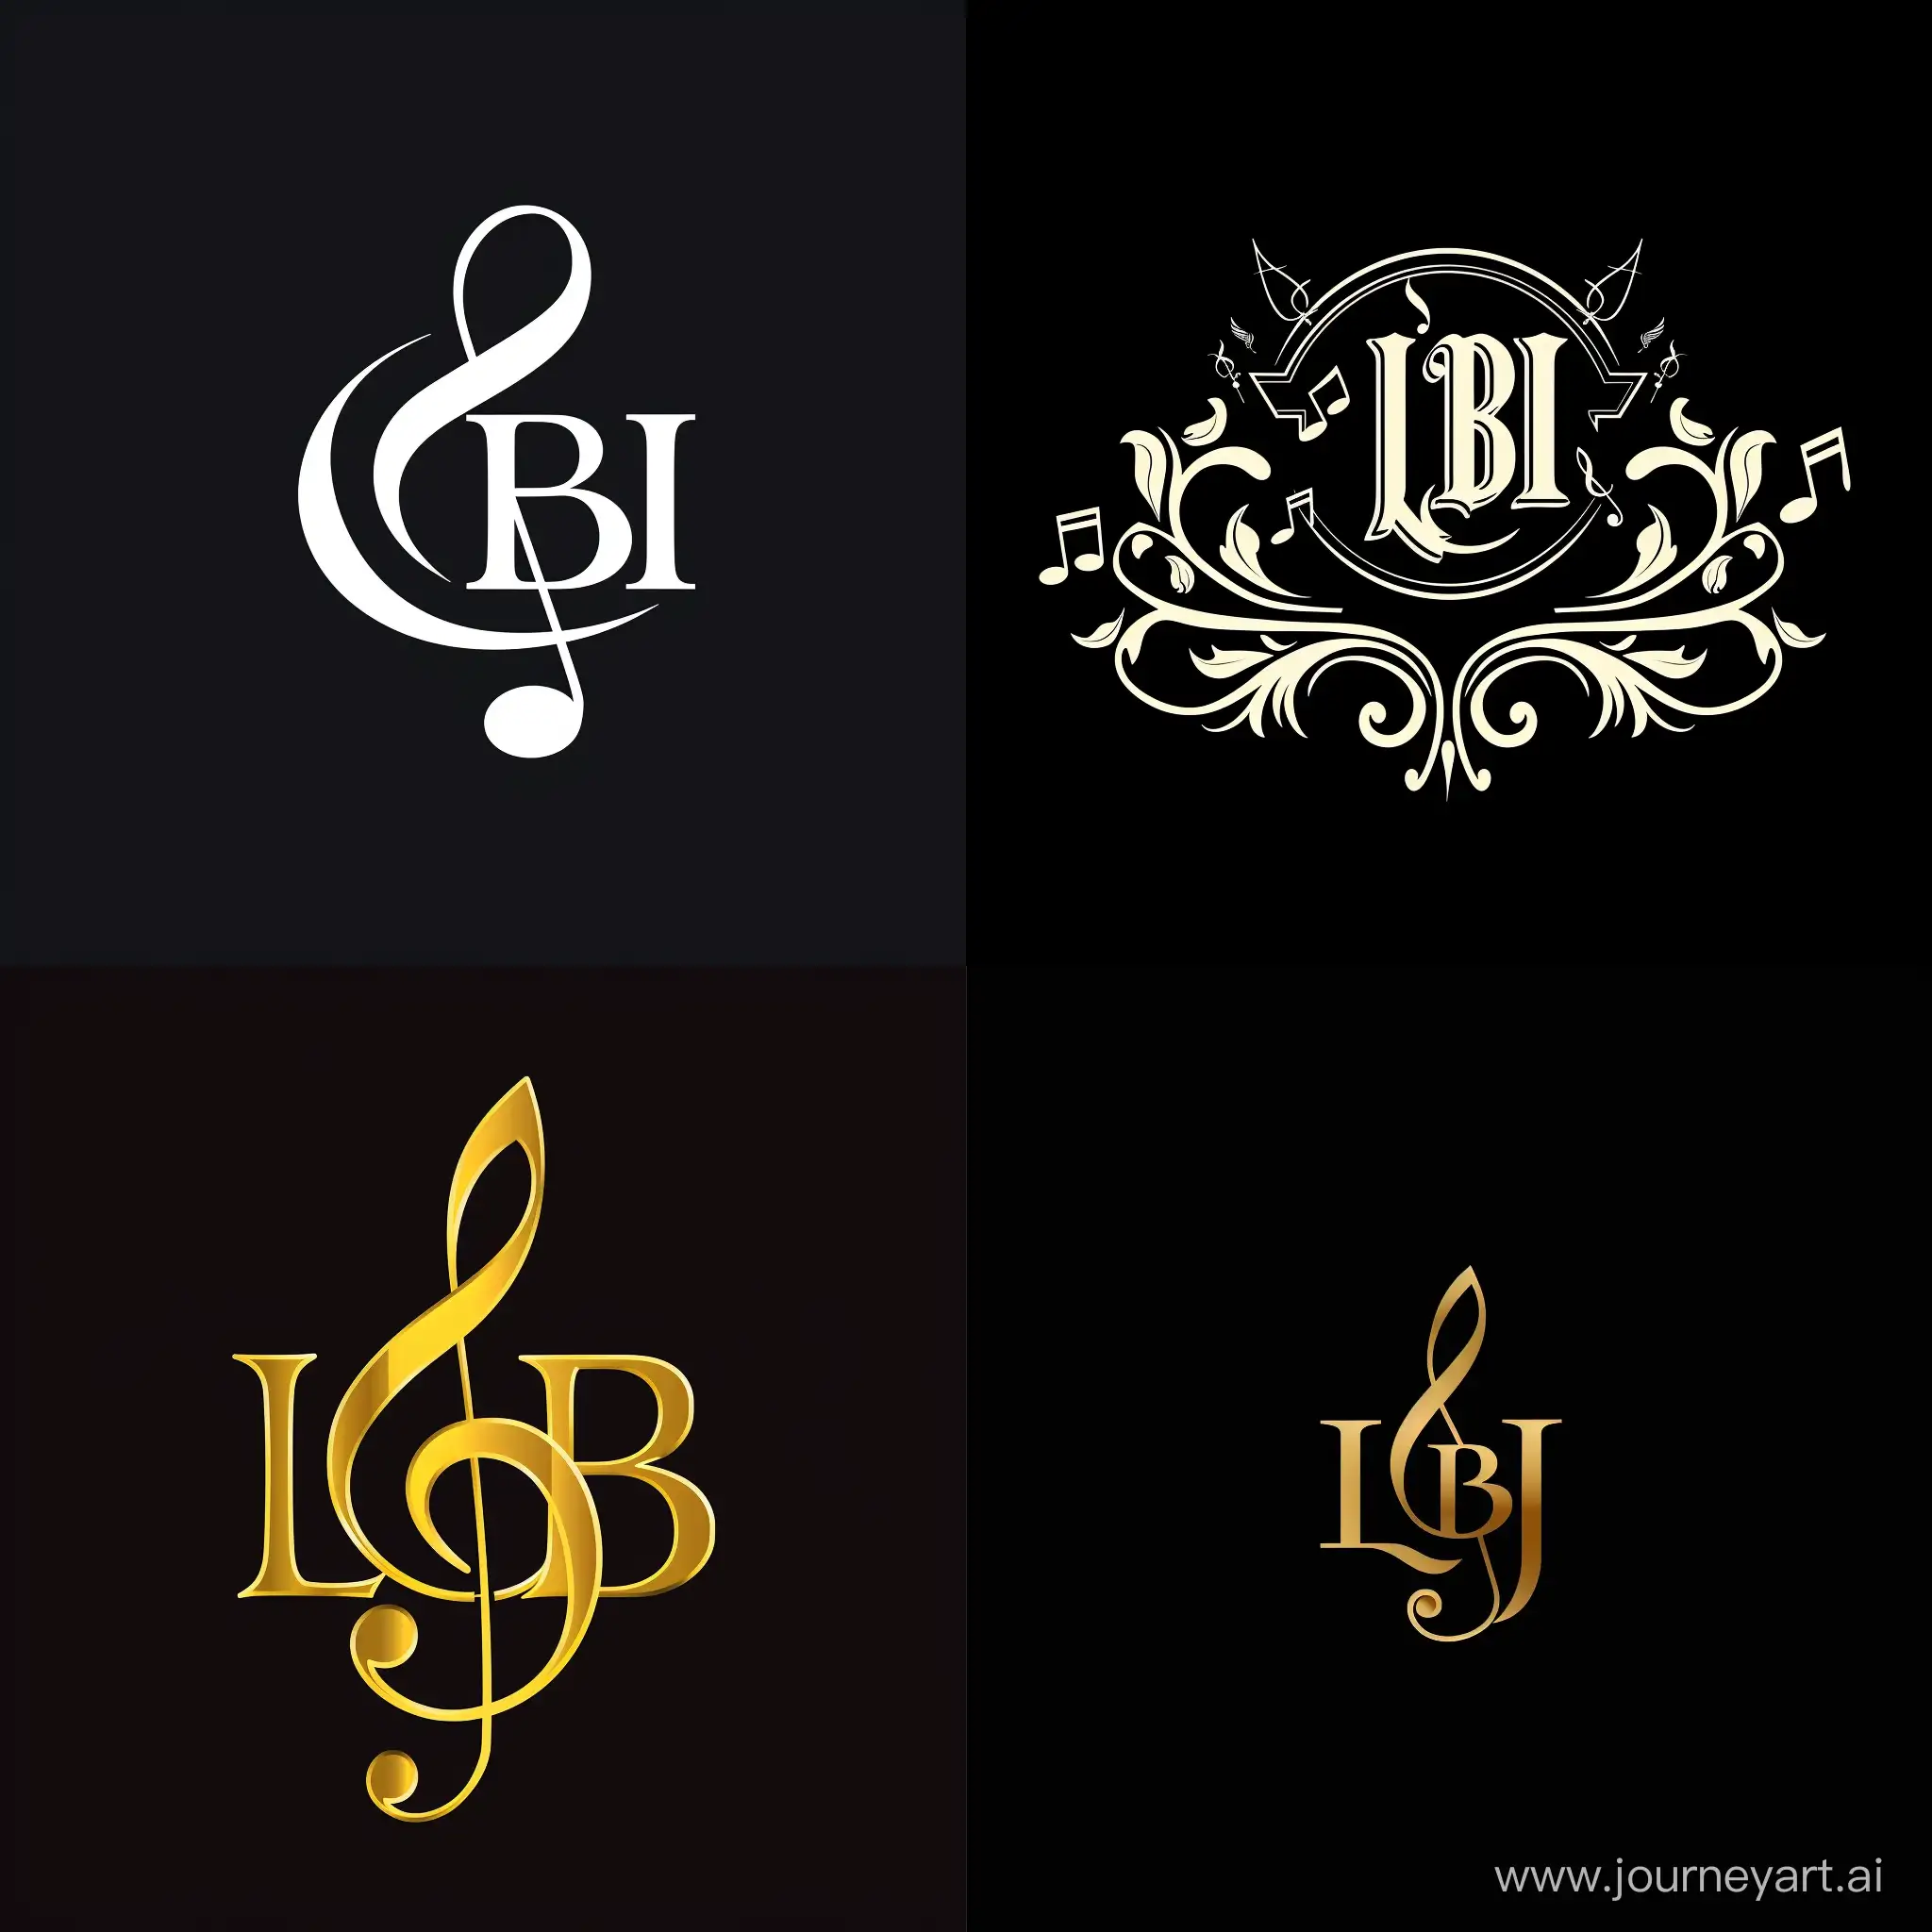 LBI-Musical-Group-Logo-Version-6-in-Square-Format-with-Distinctive-Numerical-Design